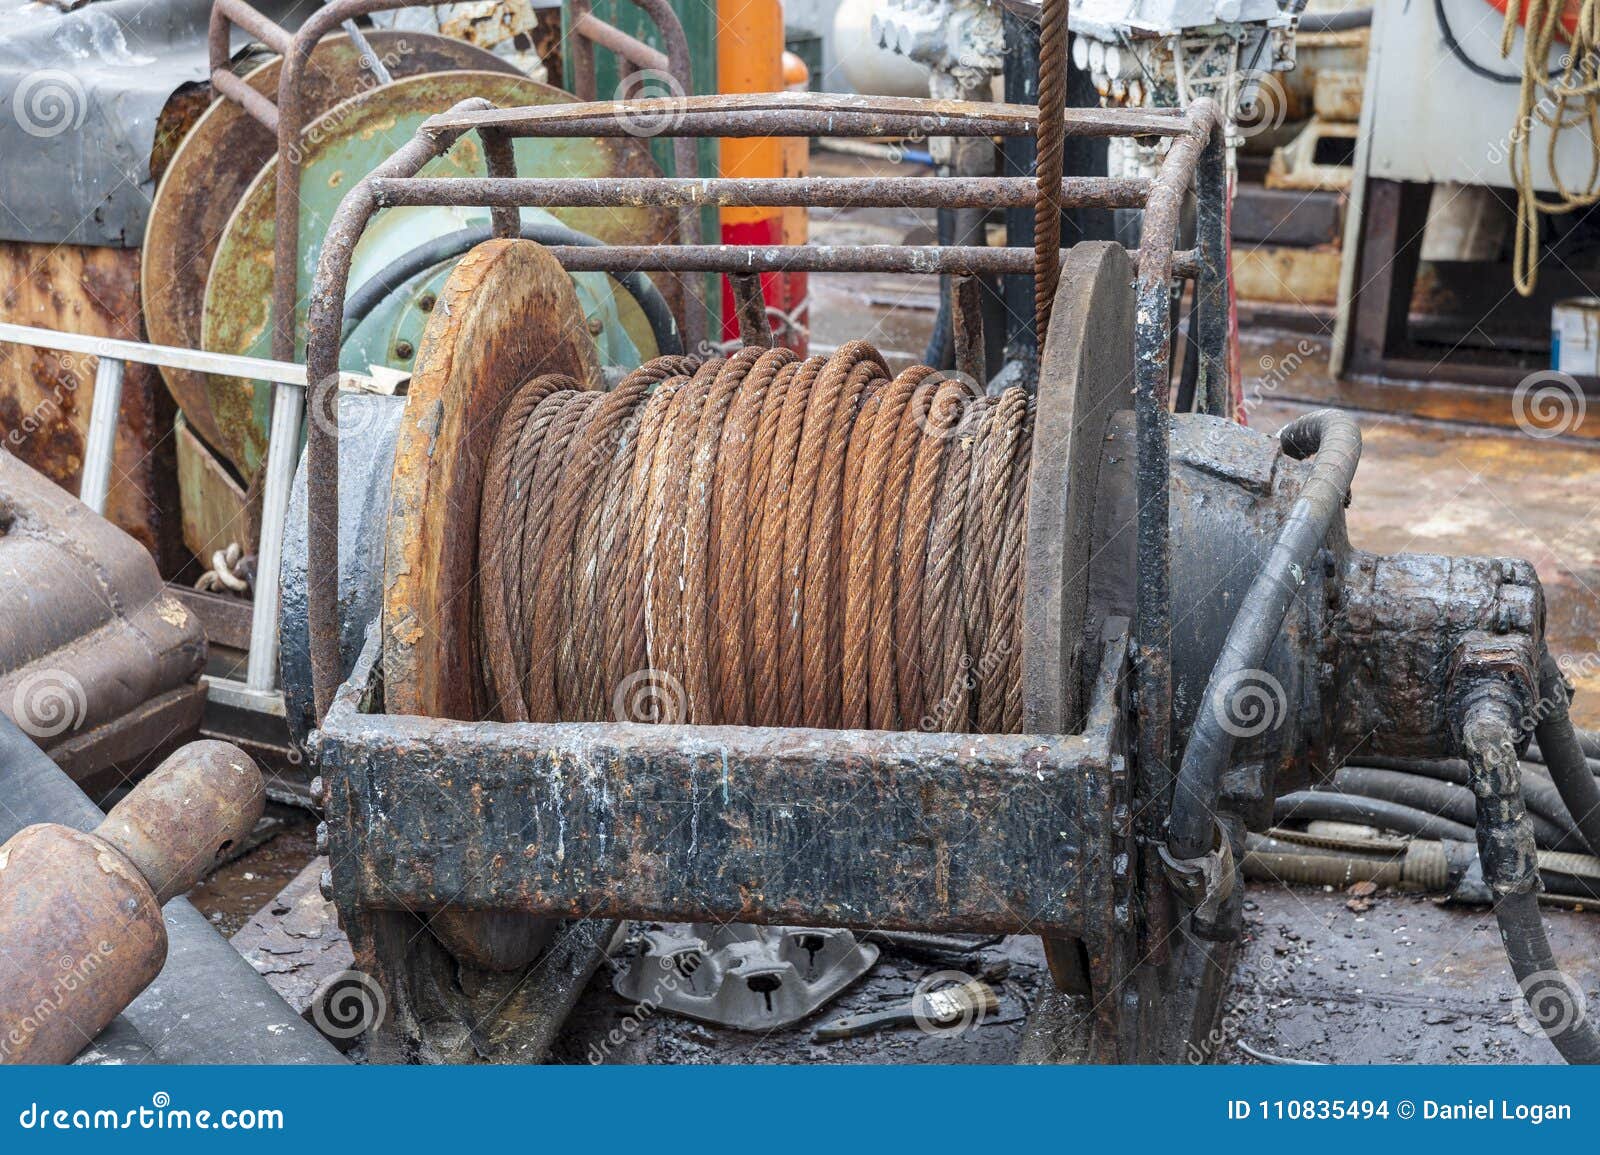 Old Commercial Fishing Gear Stock Photo - Image of harbor, outside